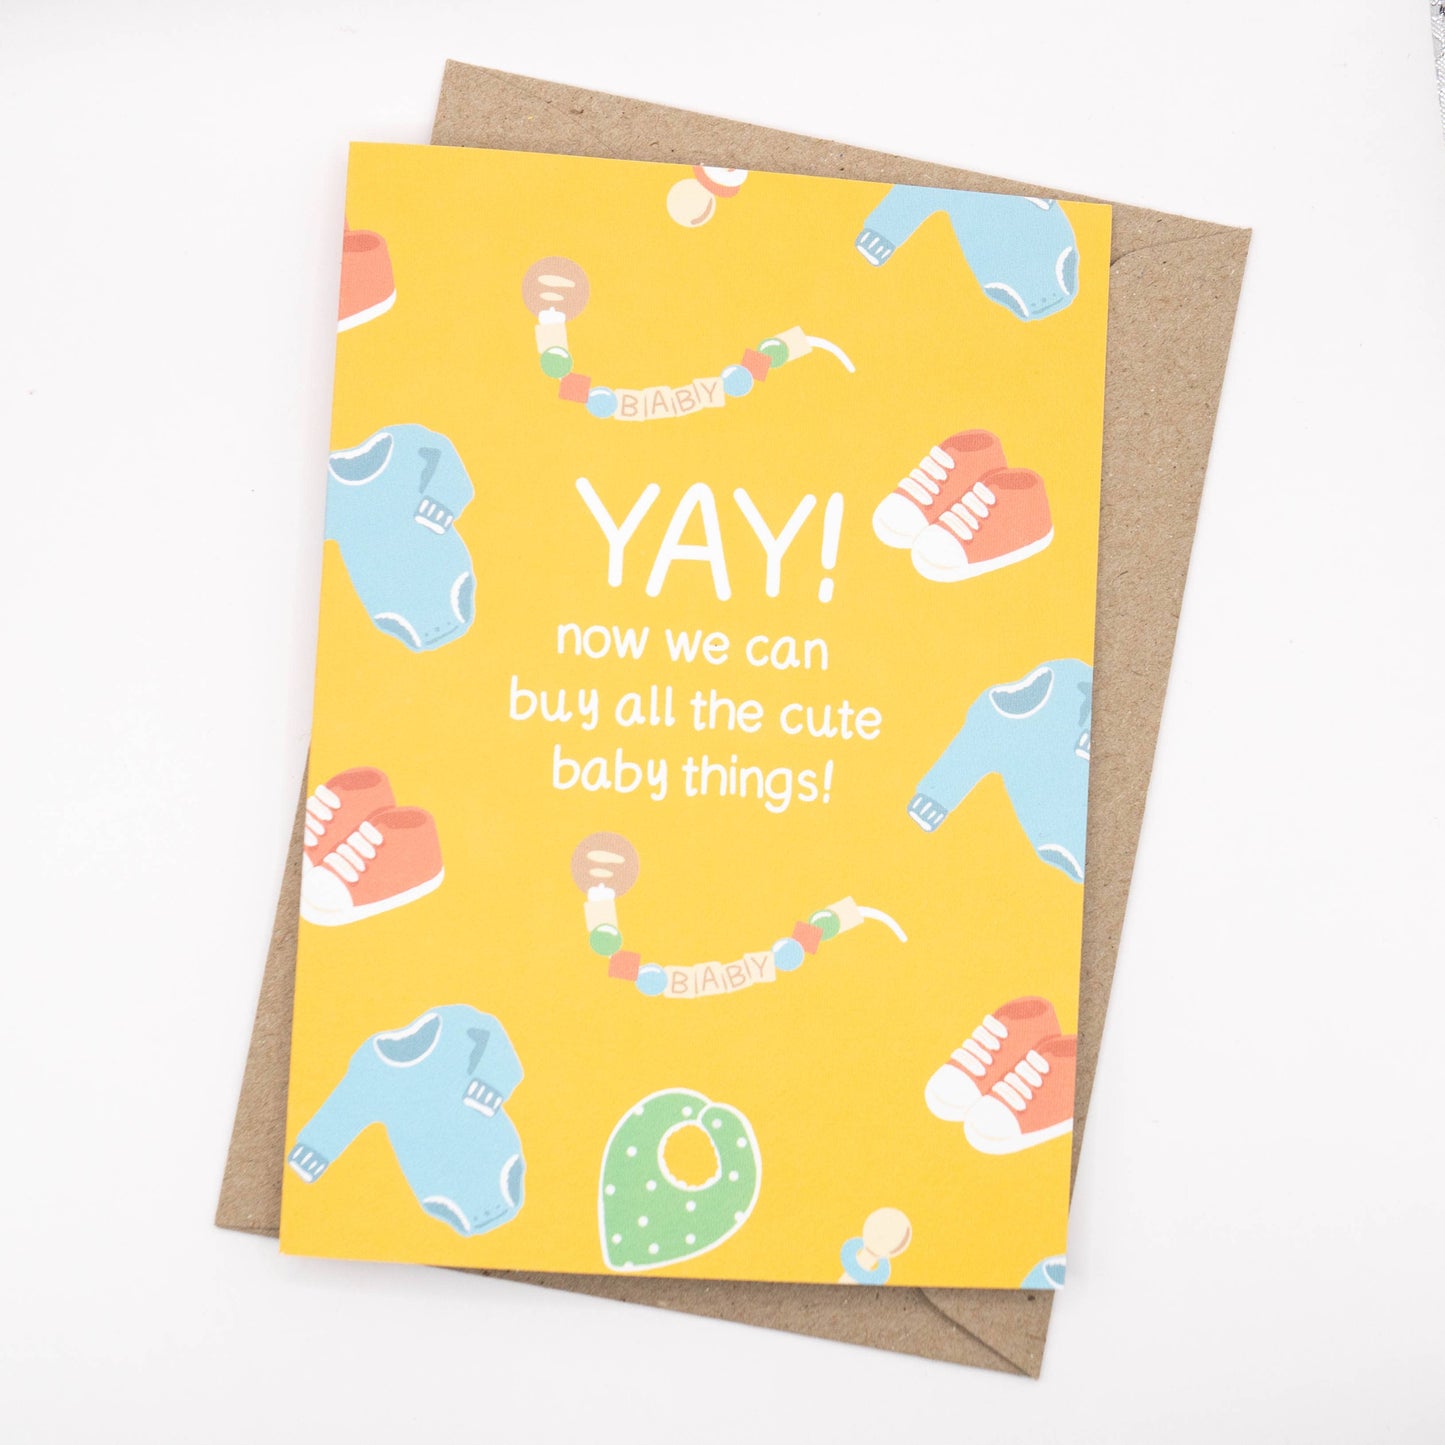 Tilly Scribbles - 'Now We Can Buy All The Cute Baby Things!' Card